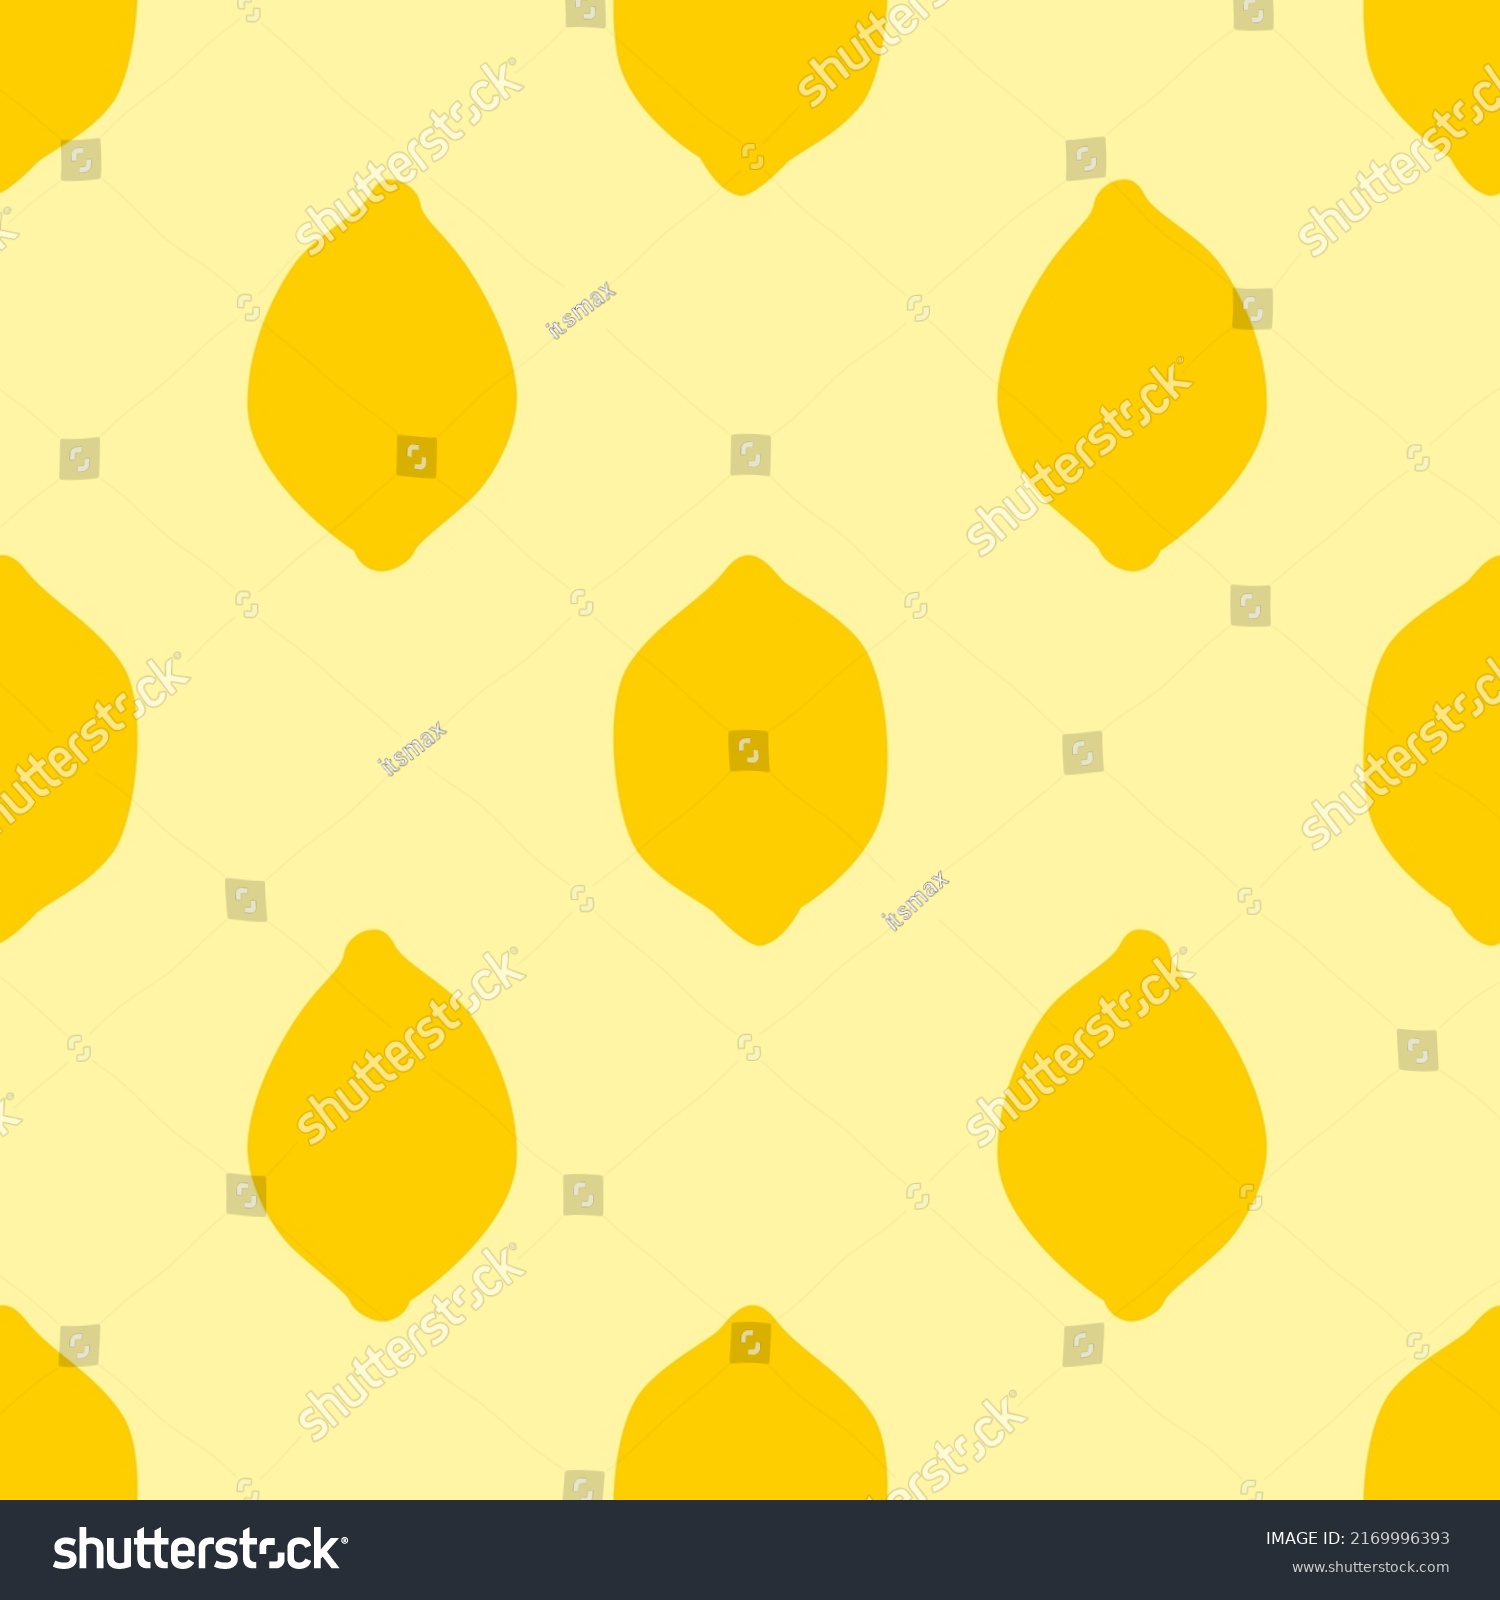 Yellow Lemon Seamless Pattern, in Flat Design Style. Hand Drawn Lemon Fruits on Bright Yellow Background, Simple Repeating Design. Summer Illustration #2169996393